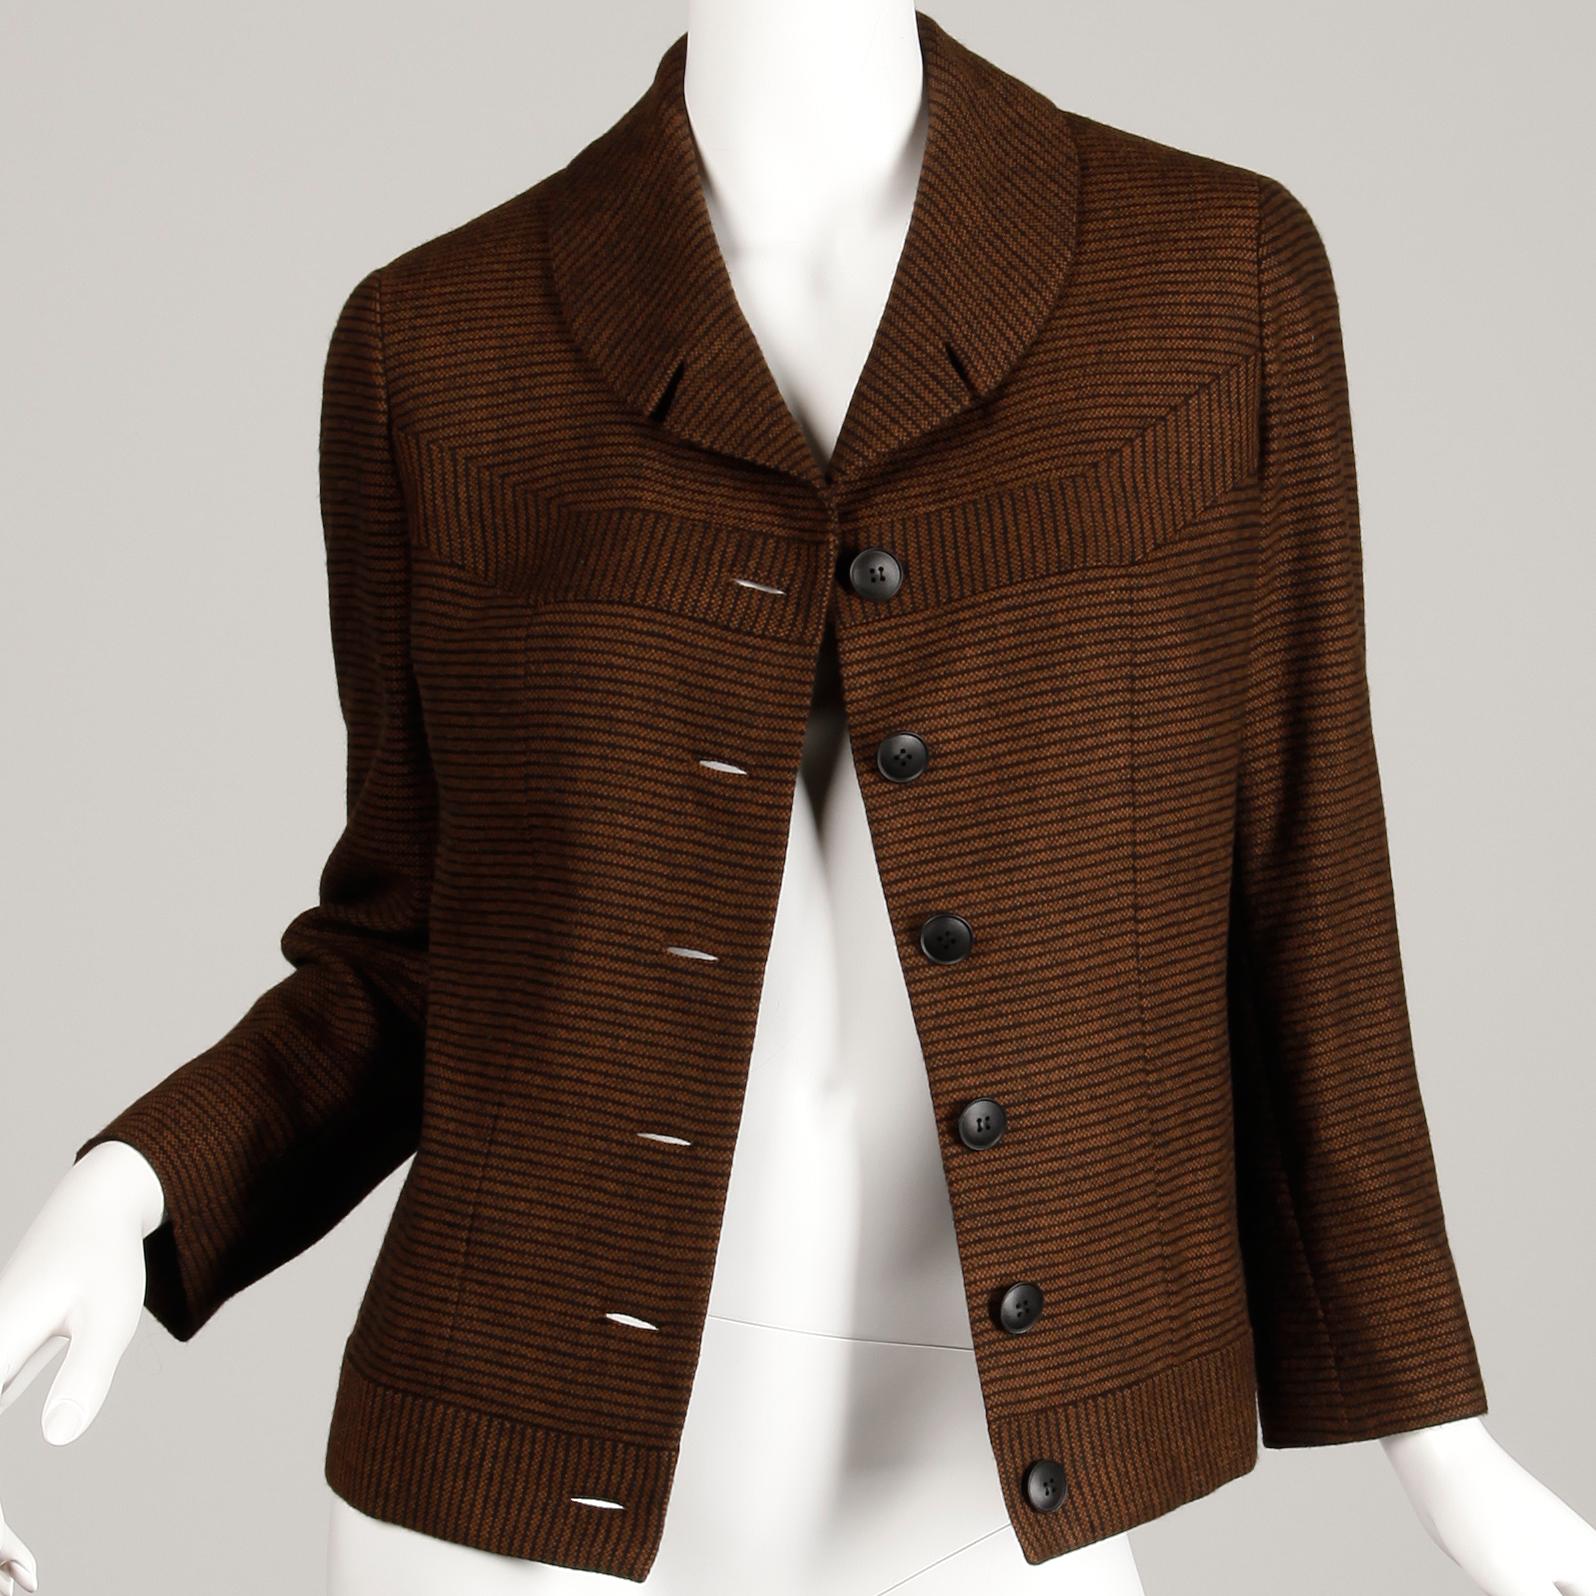 1950s Vintage Brown + Black Striped Wool Blazer or Suit Jacket Size Small